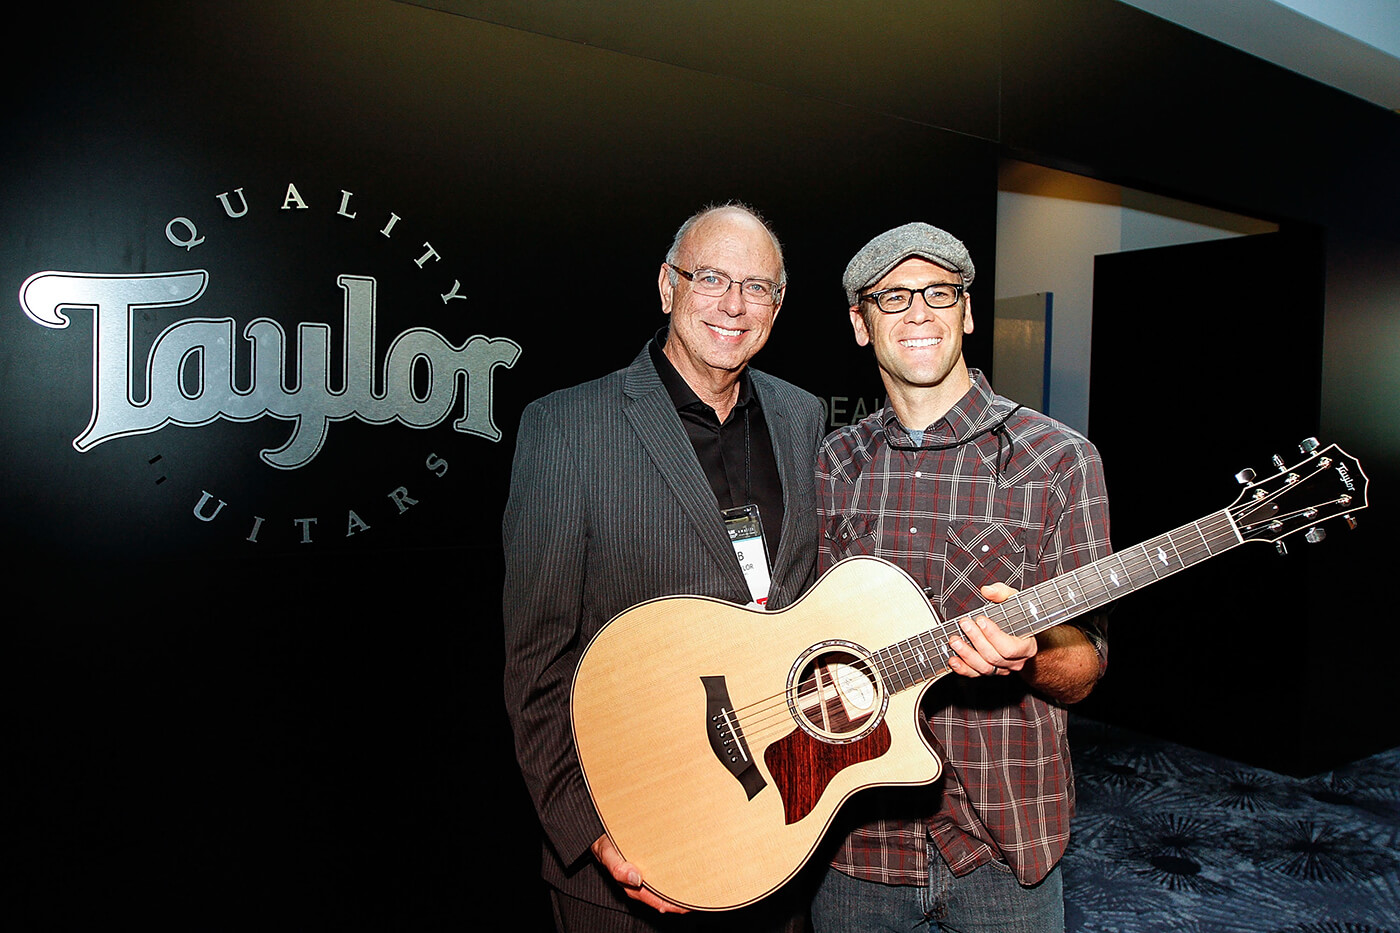 Taylor Guitars founder Bob Taylor and Andy Powers at the 2014 NAMM Show, photo by Daniel Knighton/FilmMagic via Getty Images